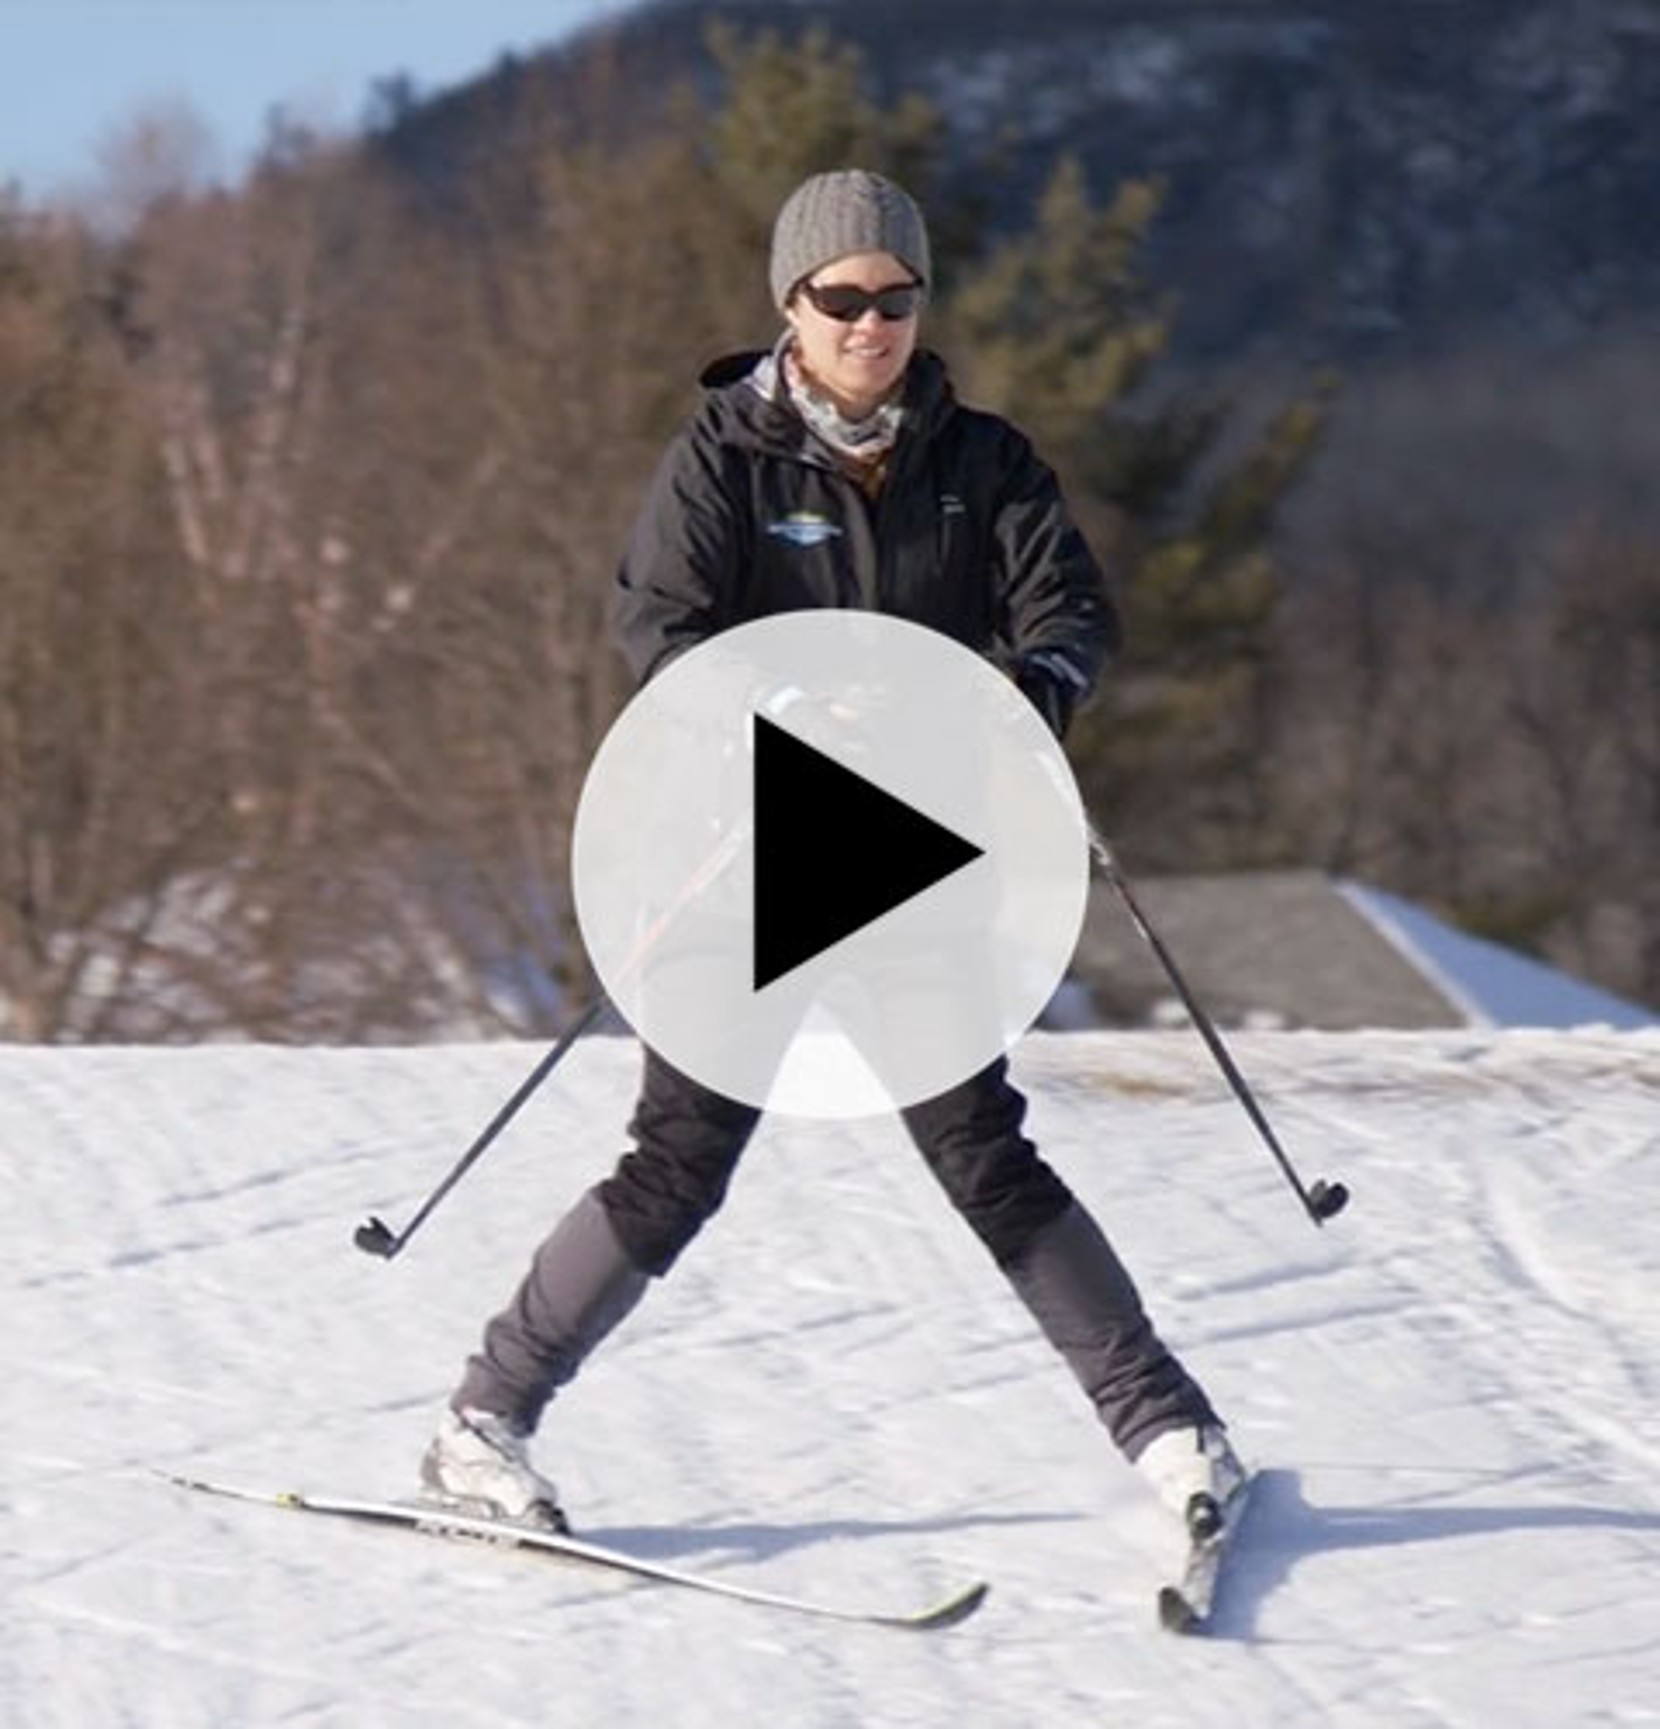 A person on cross country skis.